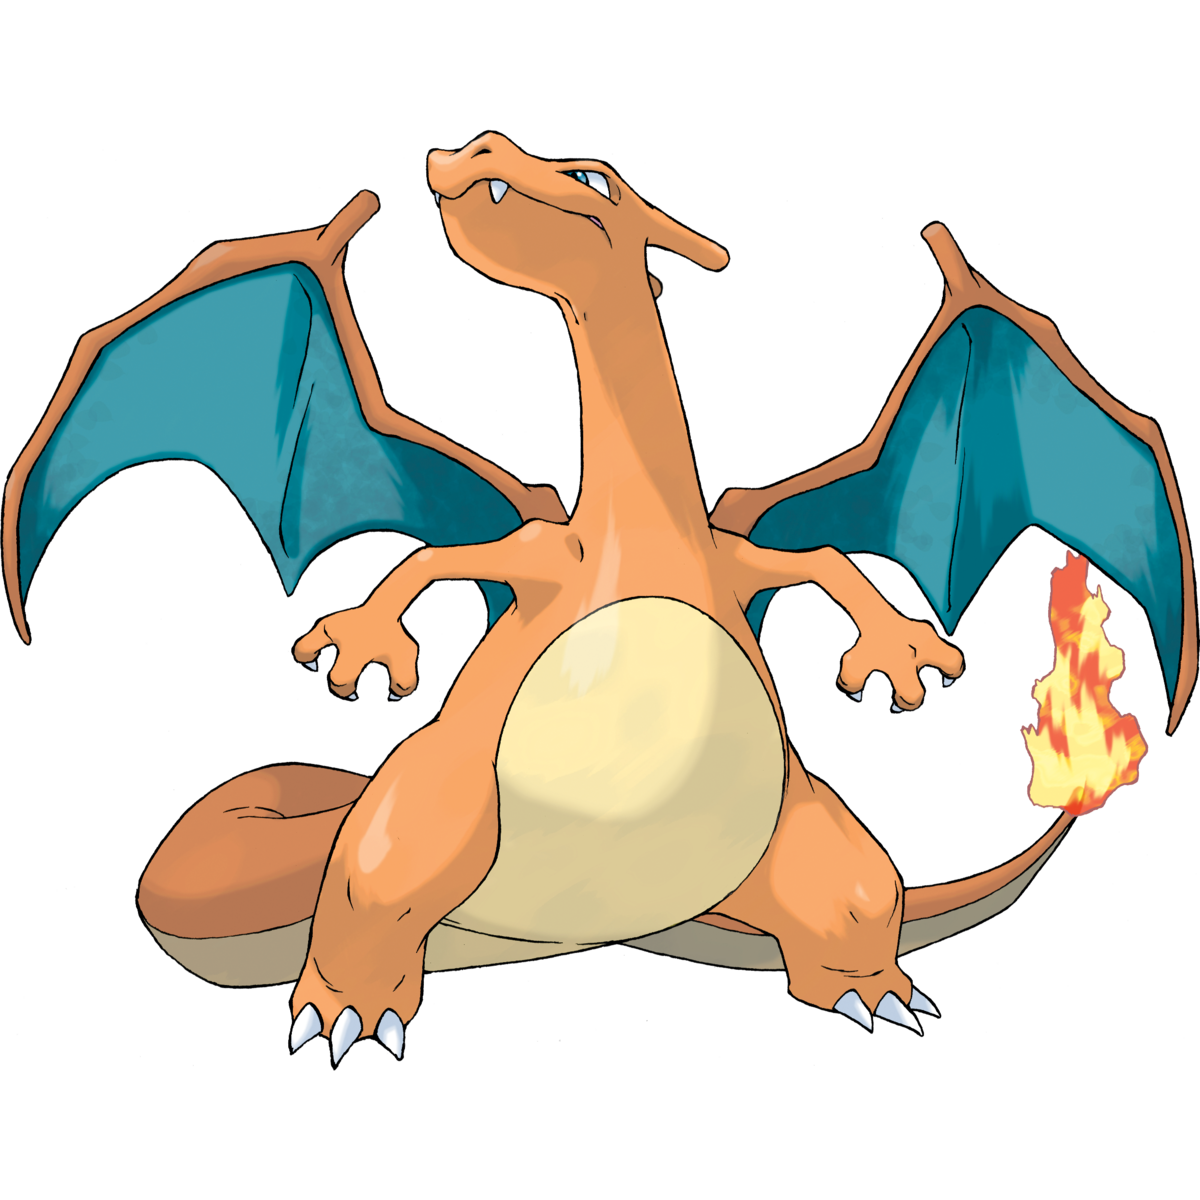 Top 999+ charizard images – Amazing Collection charizard images Full 4K